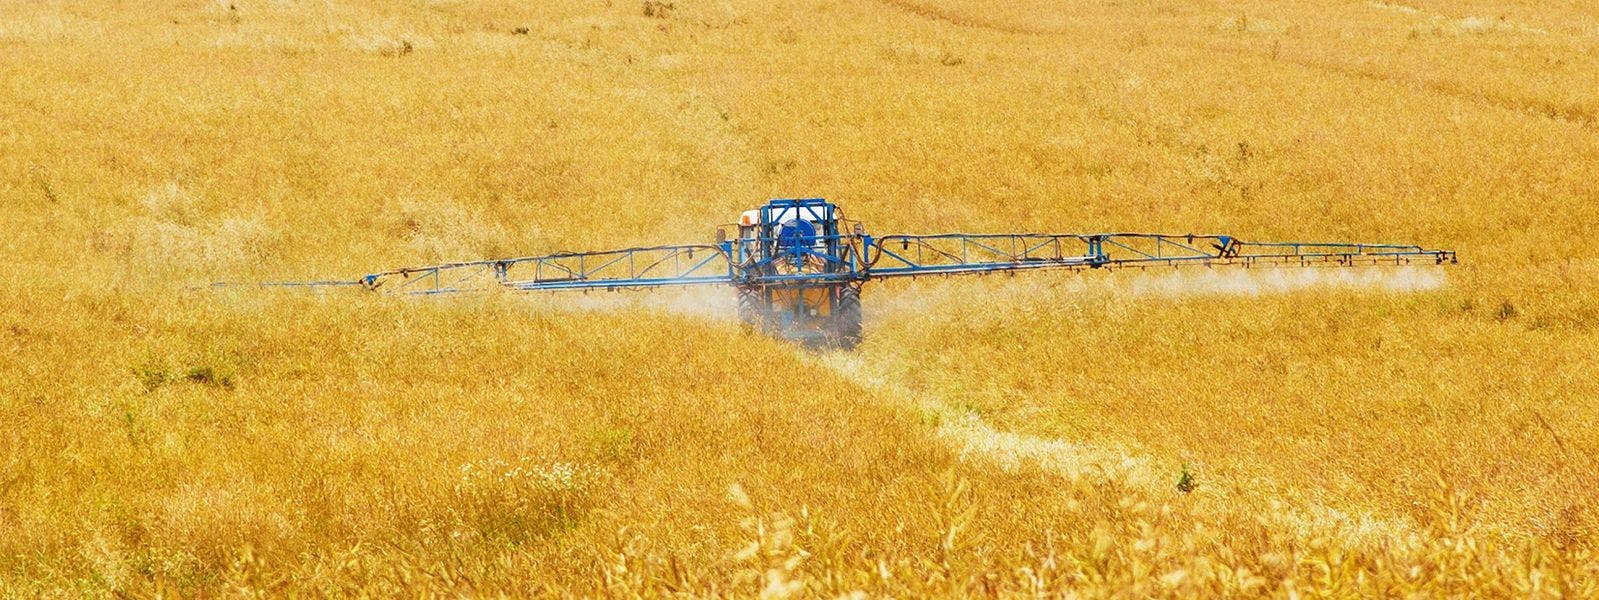 A tractor spraying crops with pesticides